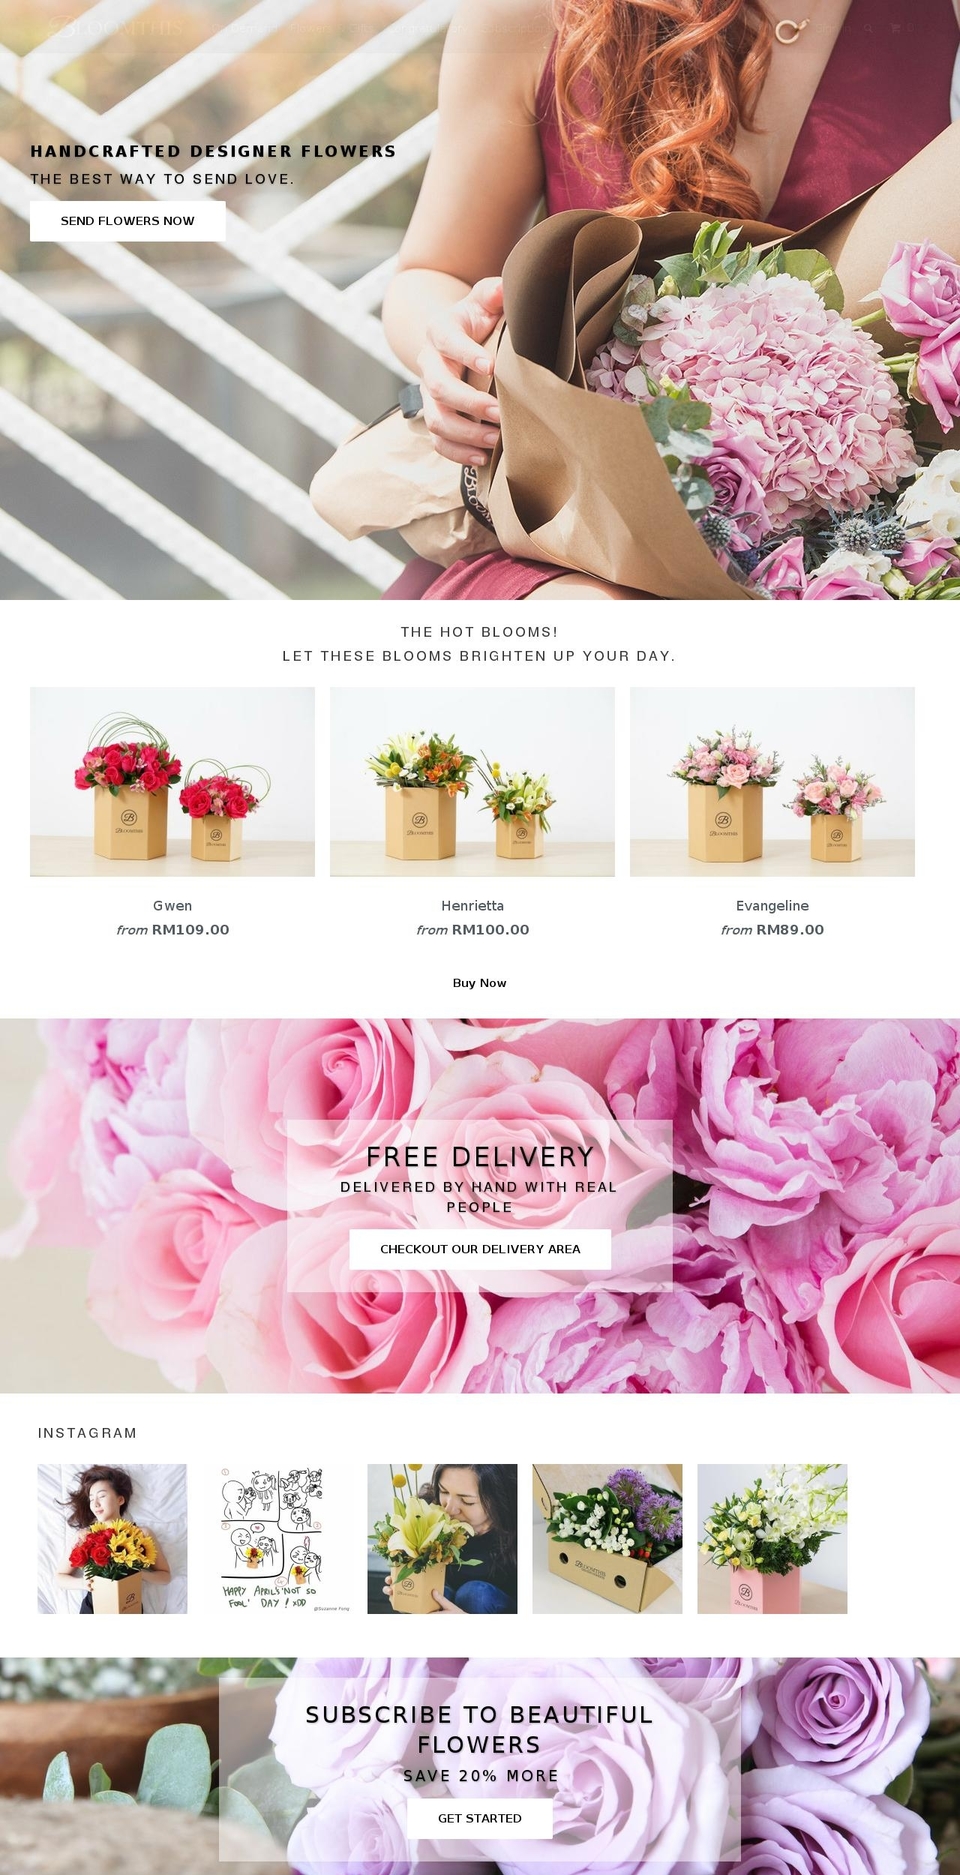 Prestige Shopify theme site example bloomthis.co